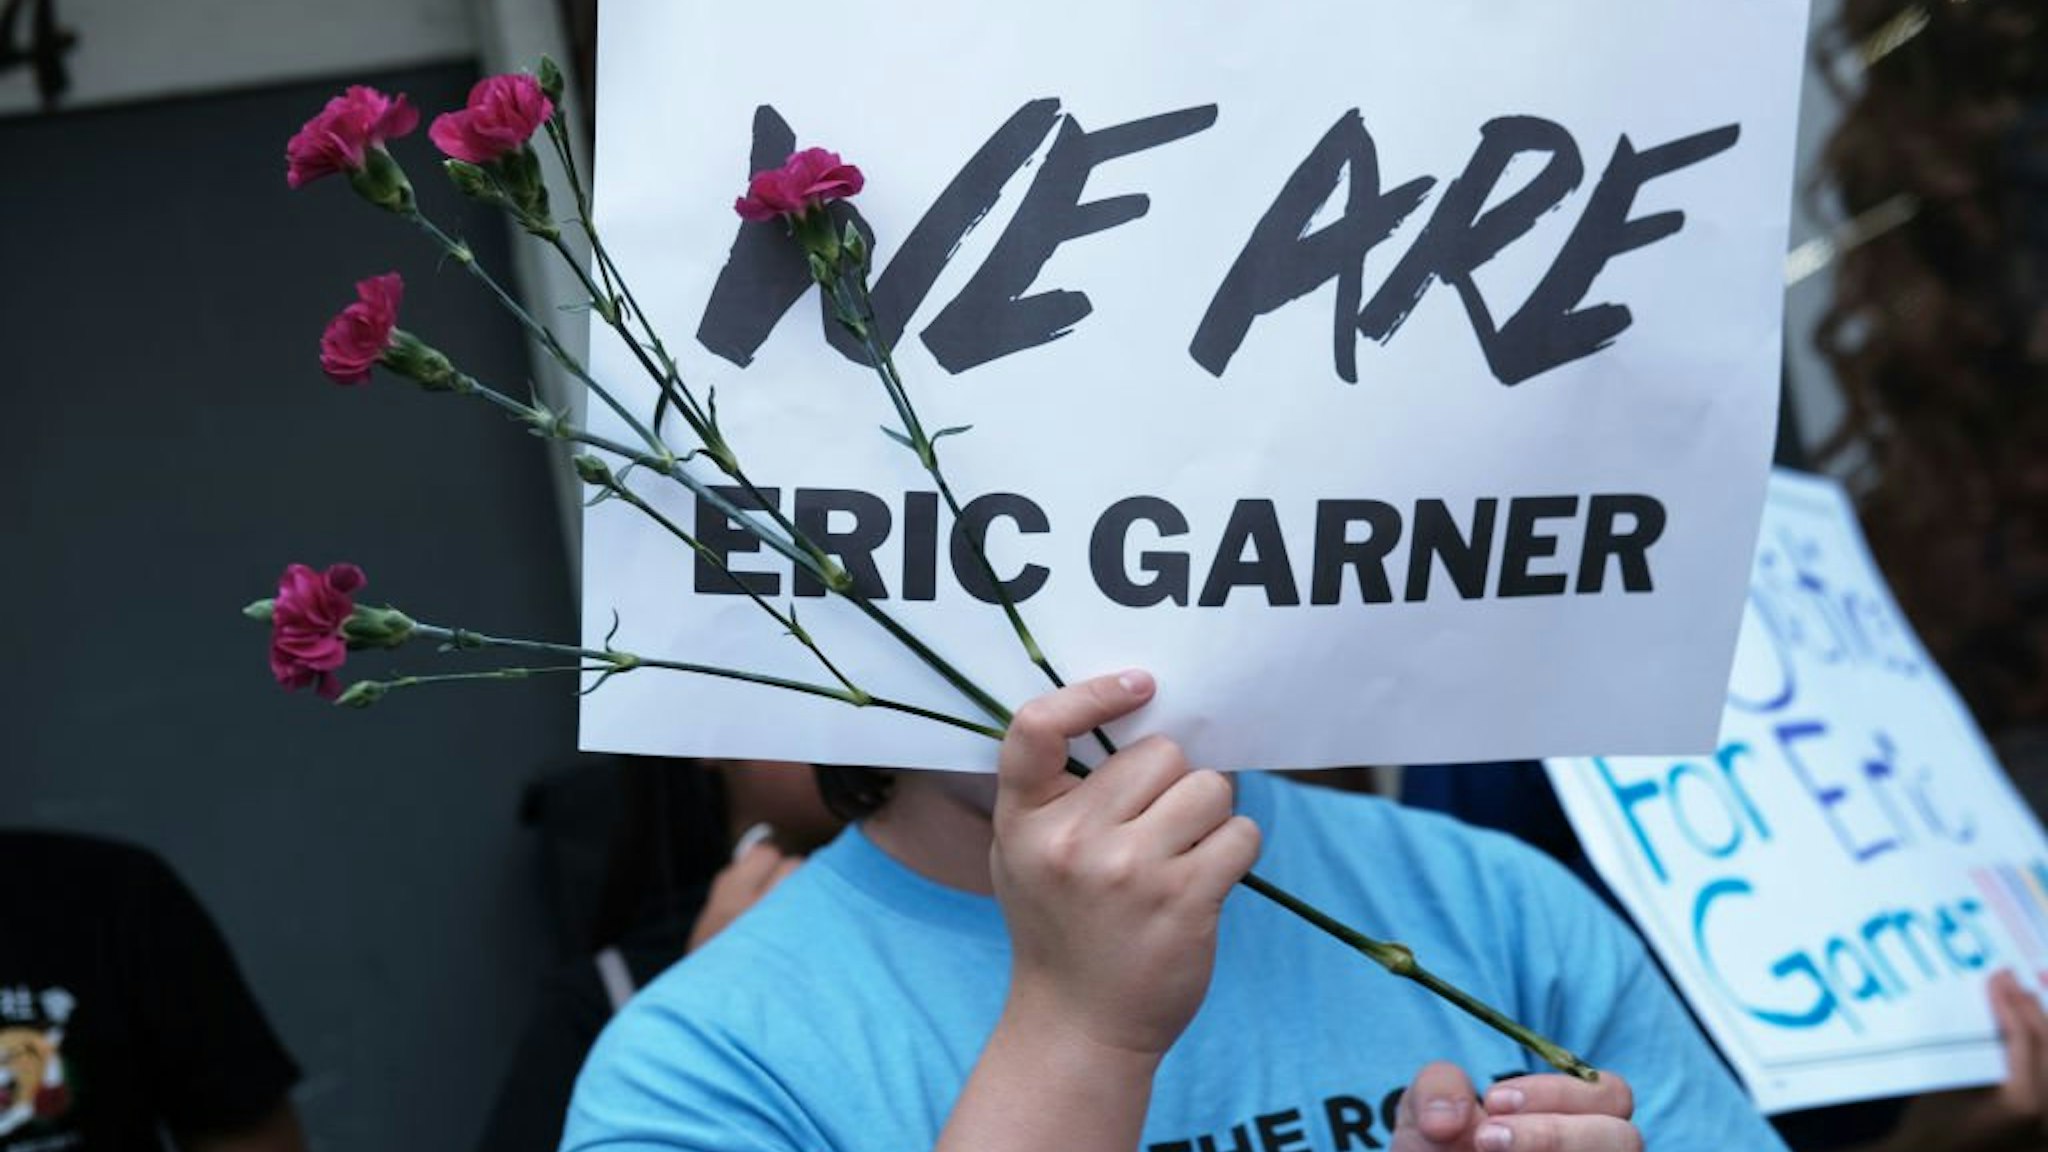 New York City students and youth activists participate in a news conference and rally to commemorate the lives of Eric Garner and Delrawn Small, both of whom were killed by police in different incidents, on August 08, 2019 in New York City.